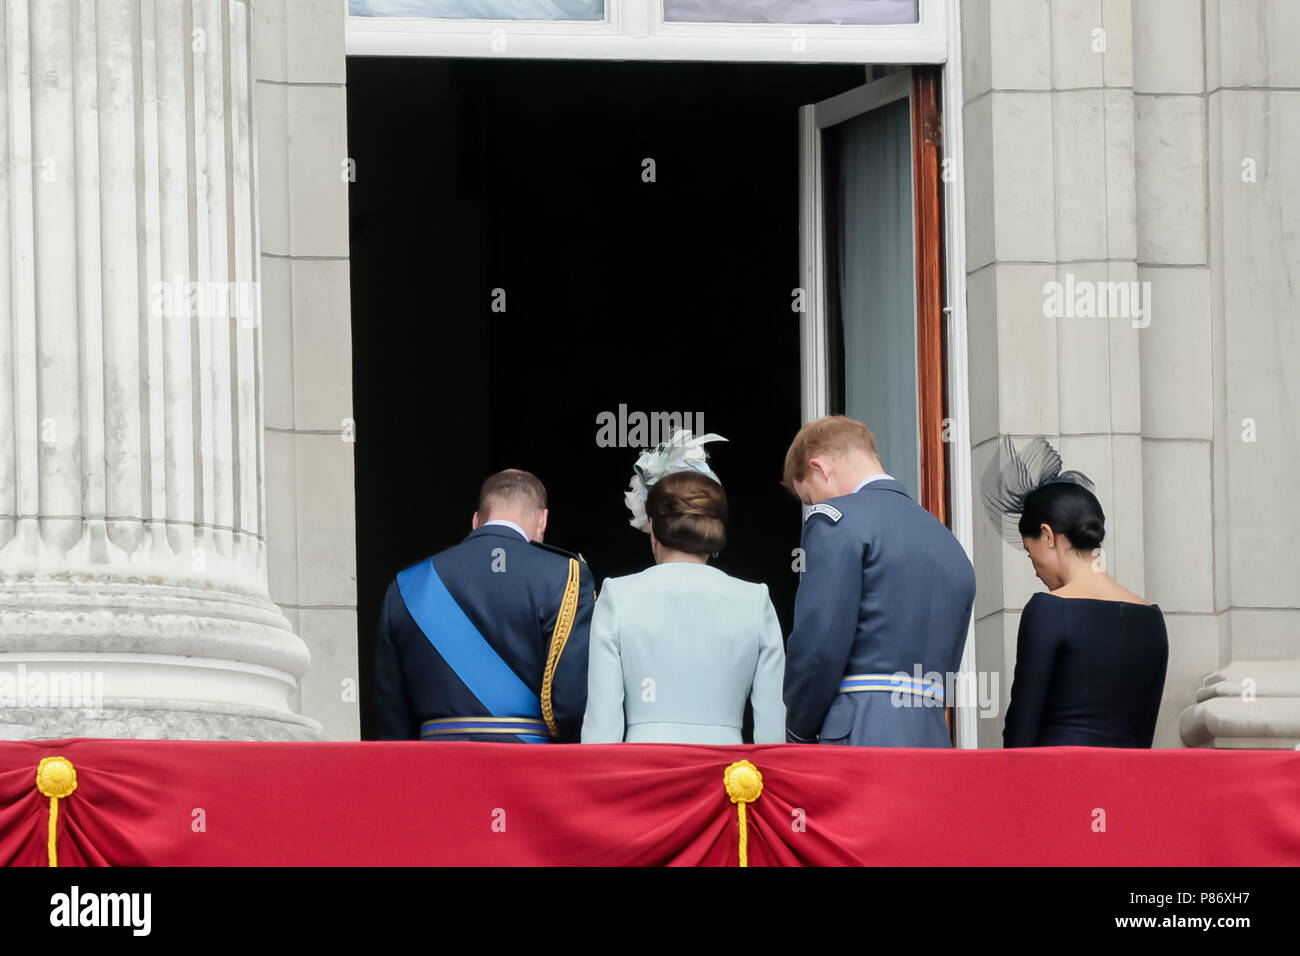 London, UK. 10th July 2018. The Duke and Duchess of Cambridge and The Duke and Duchess of Sussex enter Buckingham Palace after watching the flypast from the Balcony. The Flypast followed a parade to commemorate 100 years of the RAF Credit: amanda rose/Alamy Live News  Stock Photo